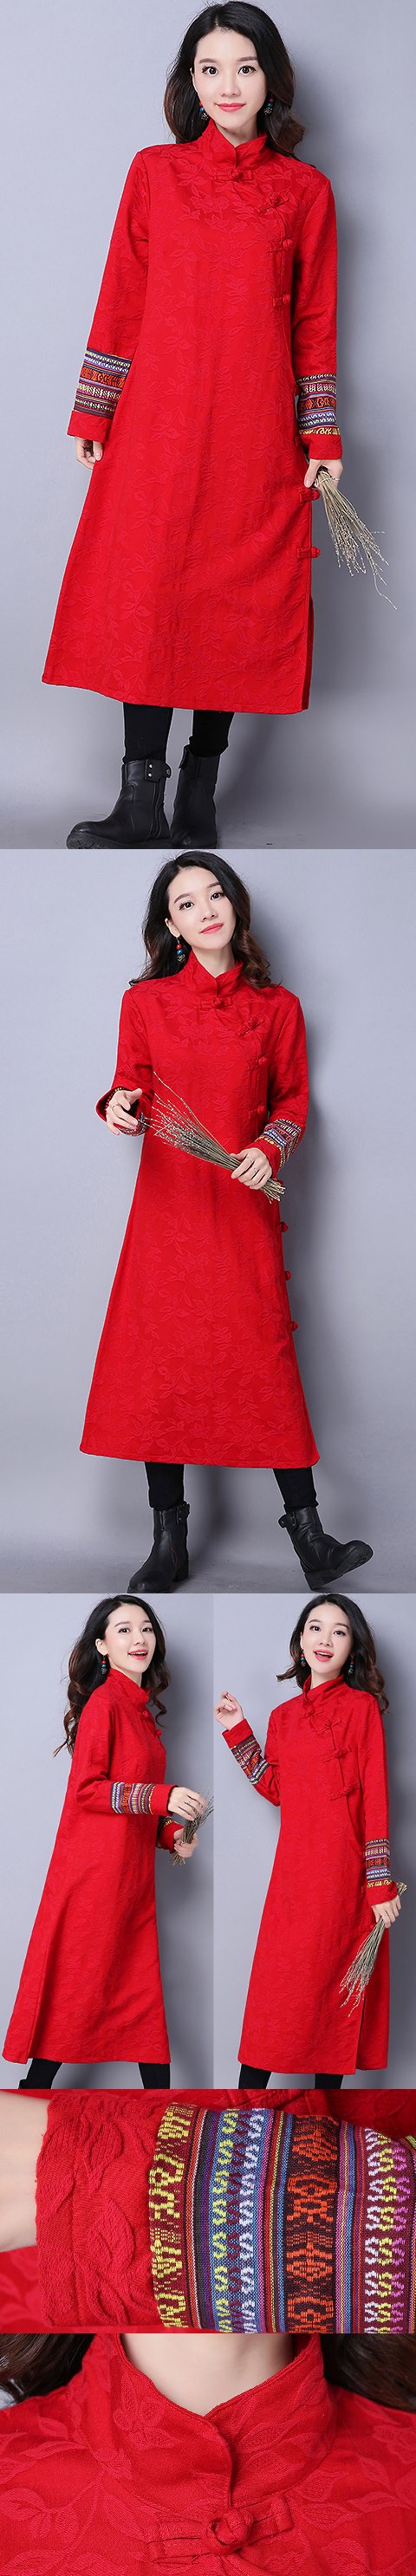 Ethnic Long-length Embroidery-sleeve Dress - Red